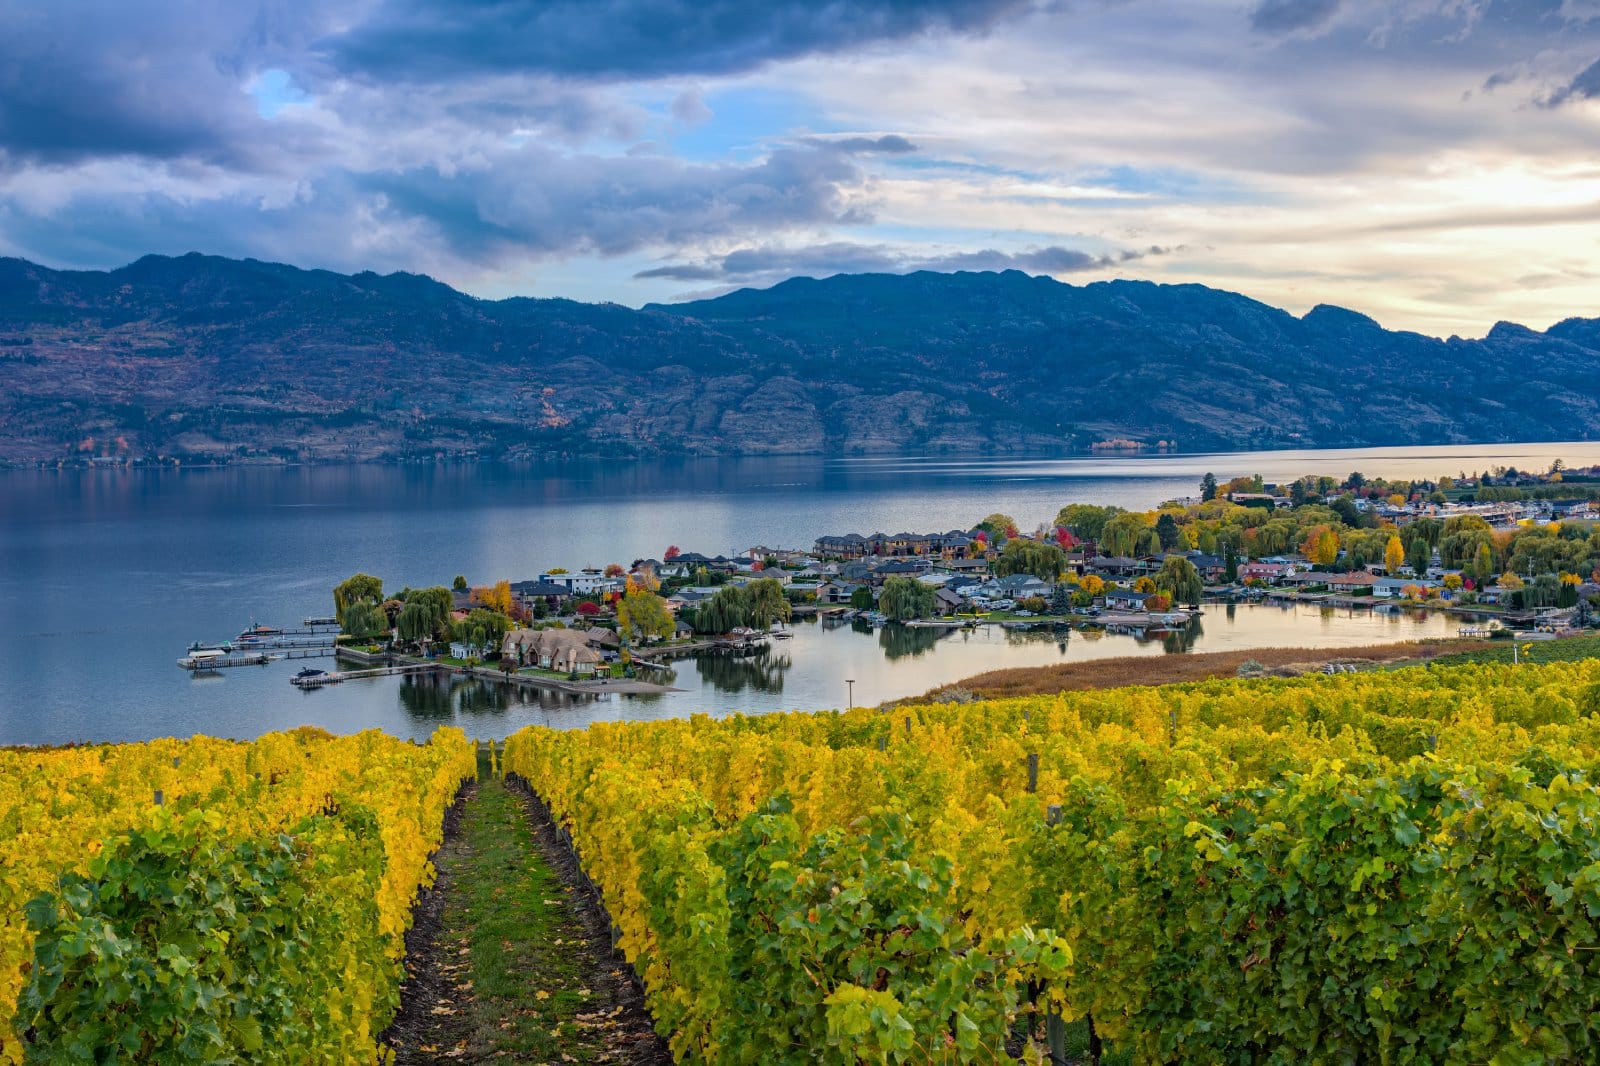 <p><span>Okanagan Valley, in British Columbia, Canada, is a wine region that has embraced sustainability with open arms. Known for its diverse microclimates and a wide range of varietals, the valley’s wineries are at the forefront of eco-friendly practices. This includes water conservation, the use of renewable energy, and organic farming methods.</span></p> <p><span>The region’s stunning natural beauty, with its lakes, mountains, and forests, provides a picturesque backdrop for wine tours. Visitors can explore the unique terroir that contributes to the distinct flavors of Okanagan wines.</span></p> <p><span>The commitment to sustainability here goes beyond the vineyards, with many wineries also focusing on building sustainable communities and preserving the natural landscape for future generations.</span></p> <p><b>Insider’s Tip: </b><span>Visit during the fall to experience the vibrant colors of the vineyards and partake in harvest events.</span></p> <p><b>When to Travel: </b><span>Summer and early fall are the best times to visit for warm weather and vineyard activities.</span></p> <p><b>How To Get There: </b><span>The Okanagan Valley is about a 5-hour drive from Vancouver or a short flight to Kelowna.</span></p>